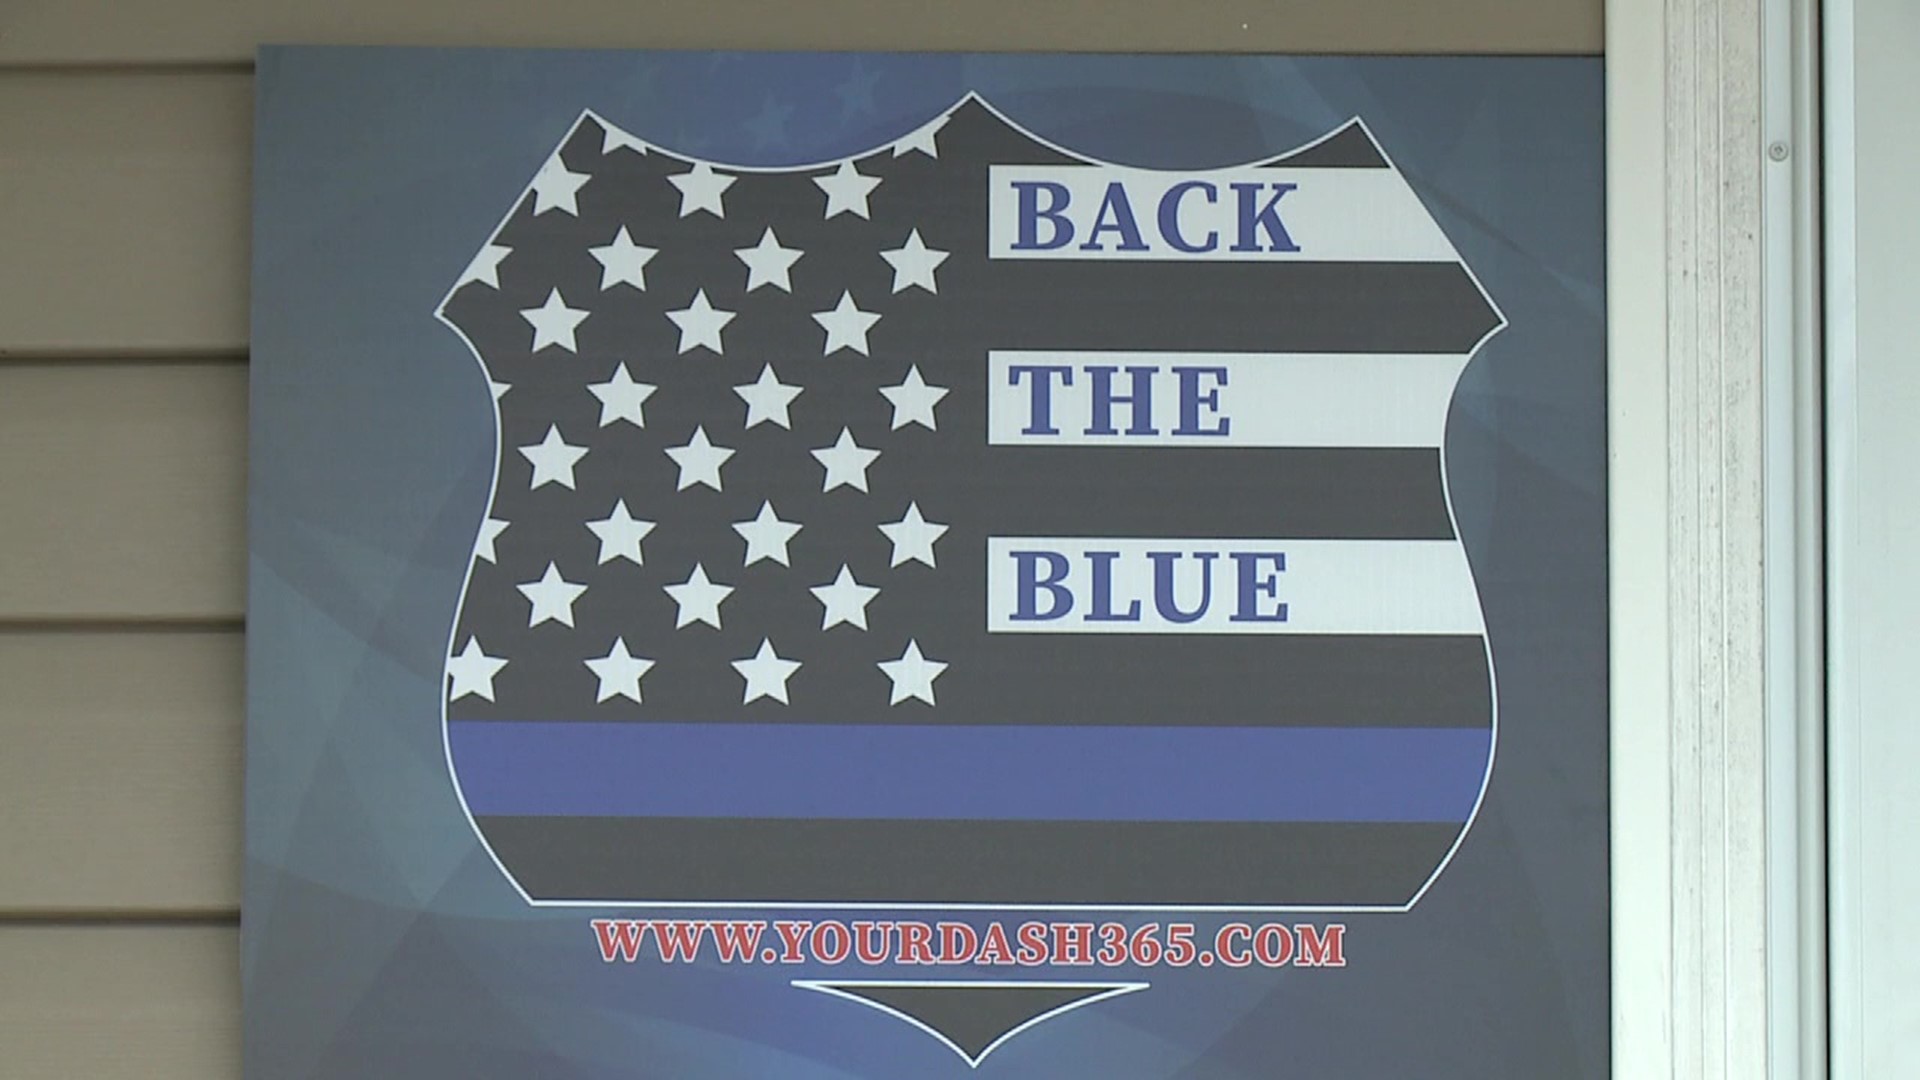 Signs showing support for law enforcement are popping up all over our area. Some in Luzerne County go to benefit police and community organizations.